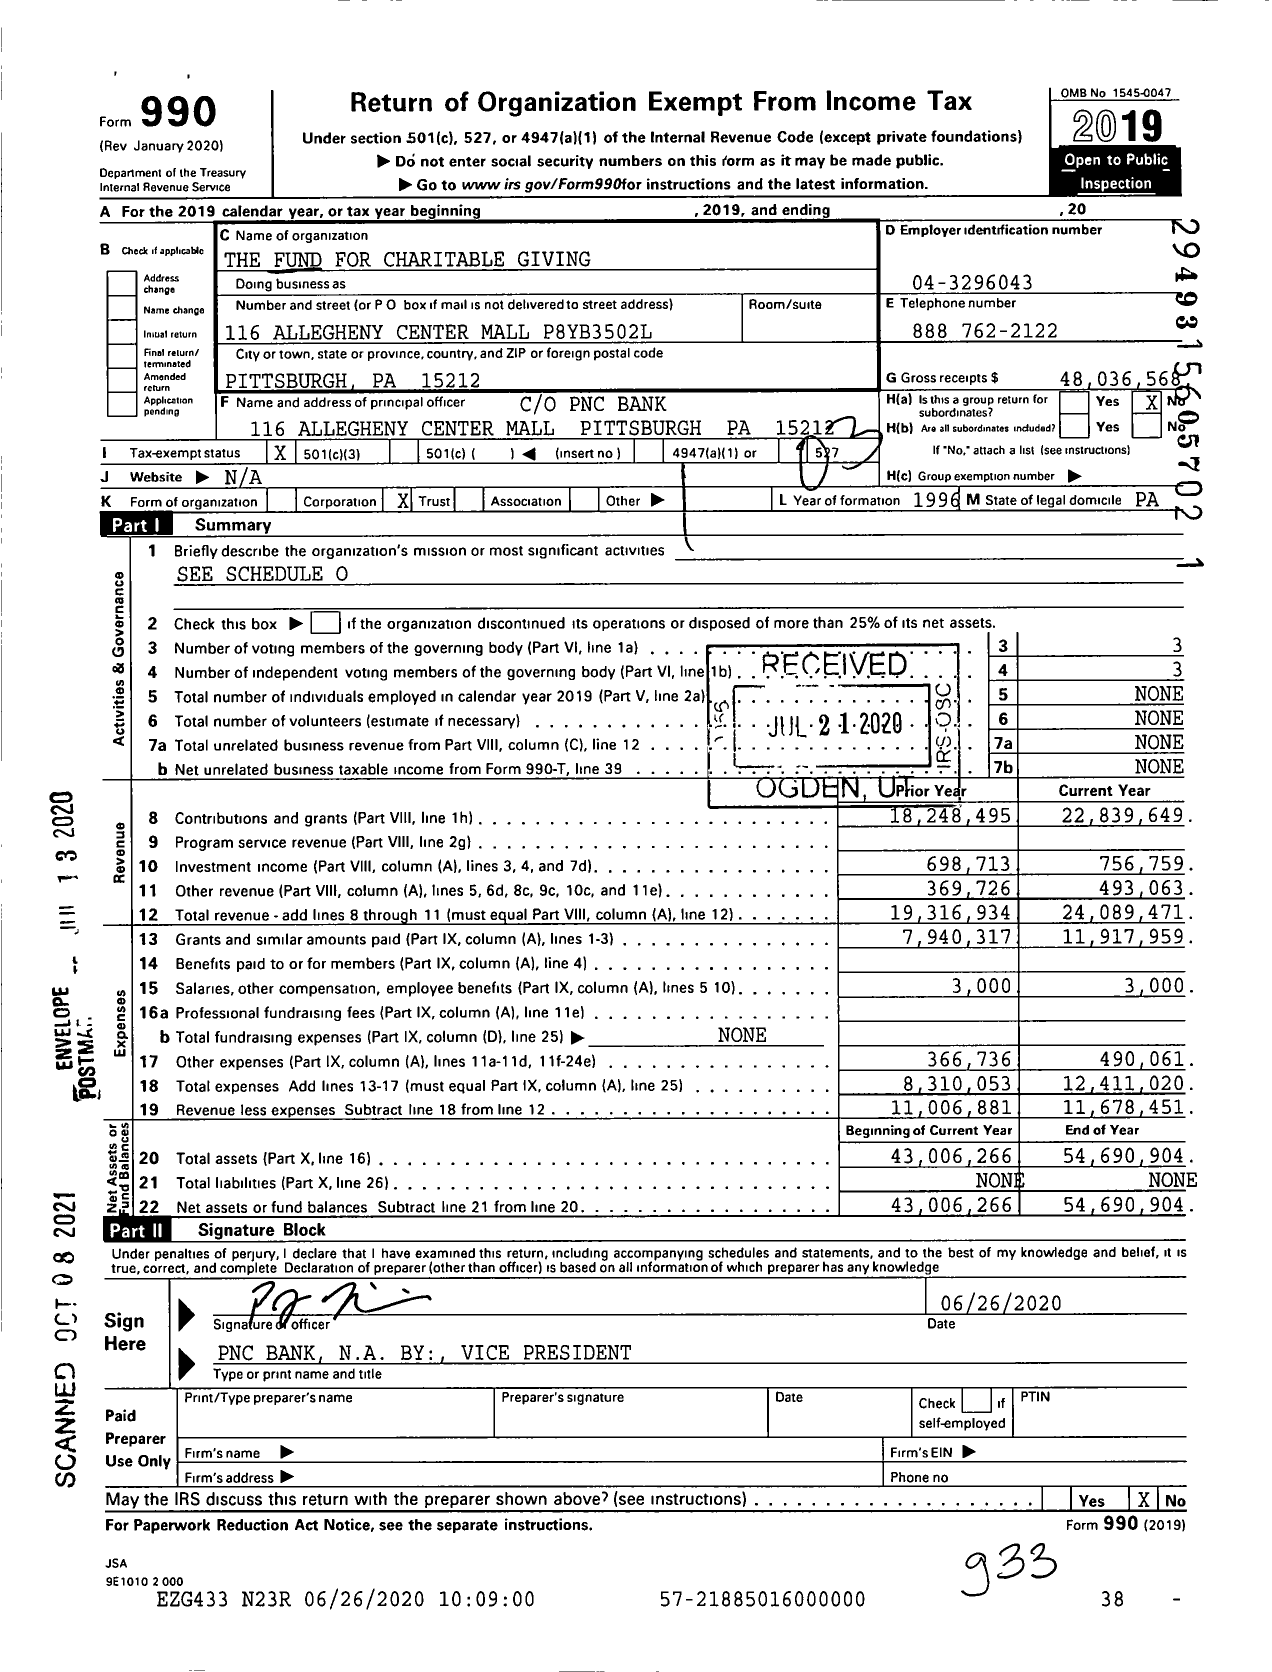 Image of first page of 2019 Form 990 for The Fund for Charitable Giving